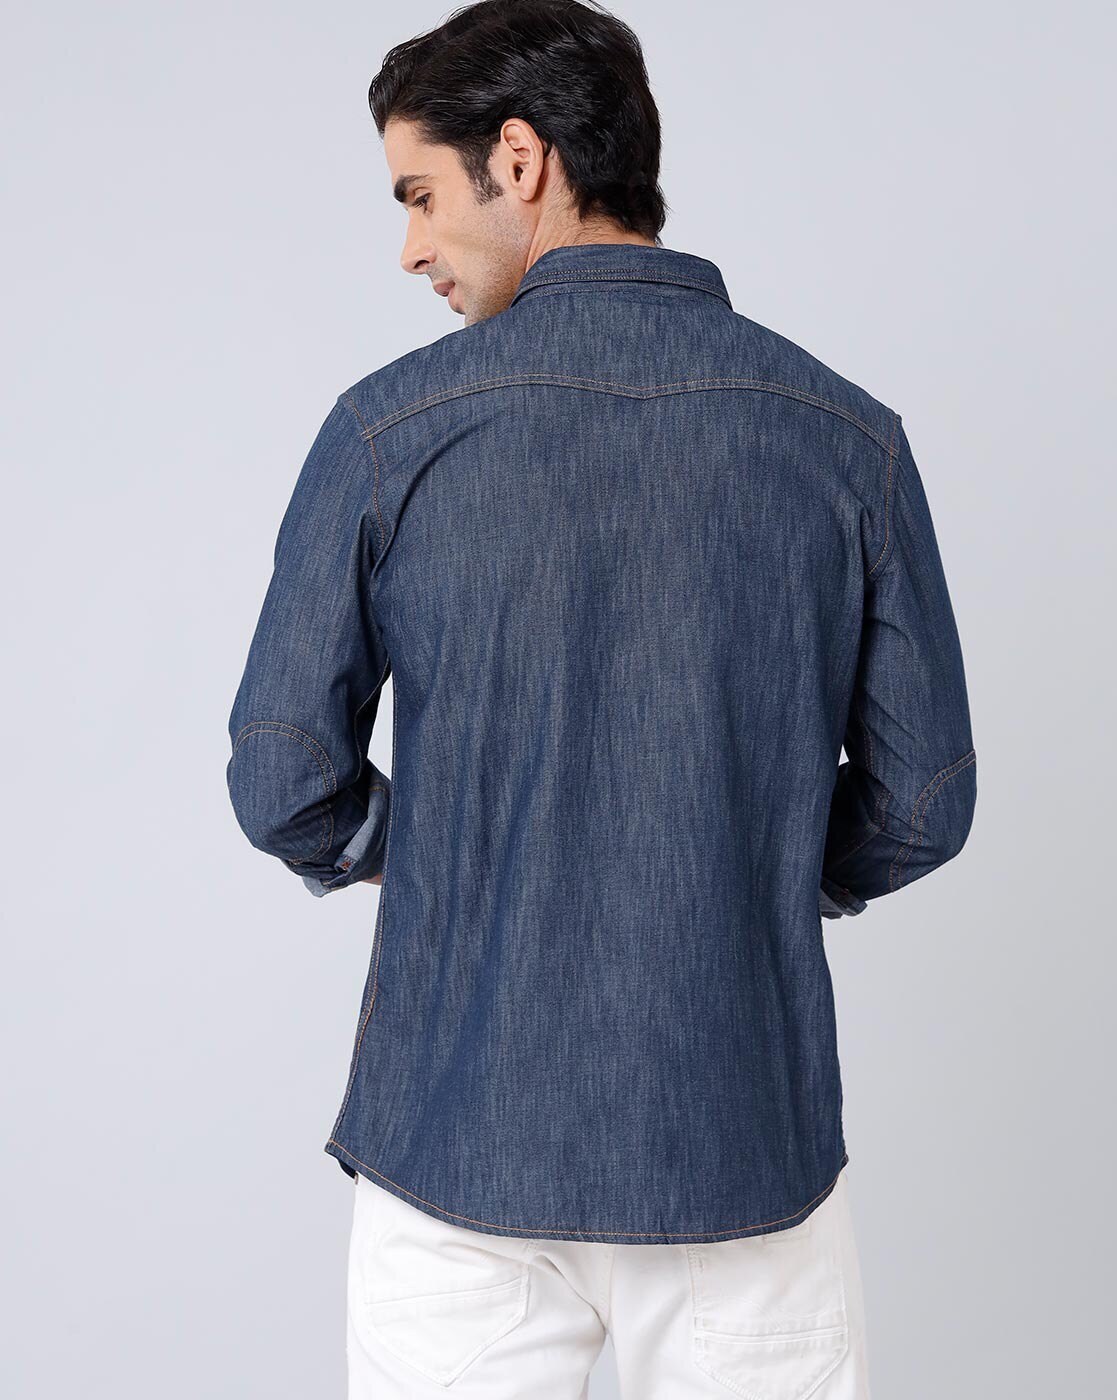 The Do's and Don'ts Of Wearing Denims | Denim shirt men, Mens denim shirt  outfit, Mens outfits